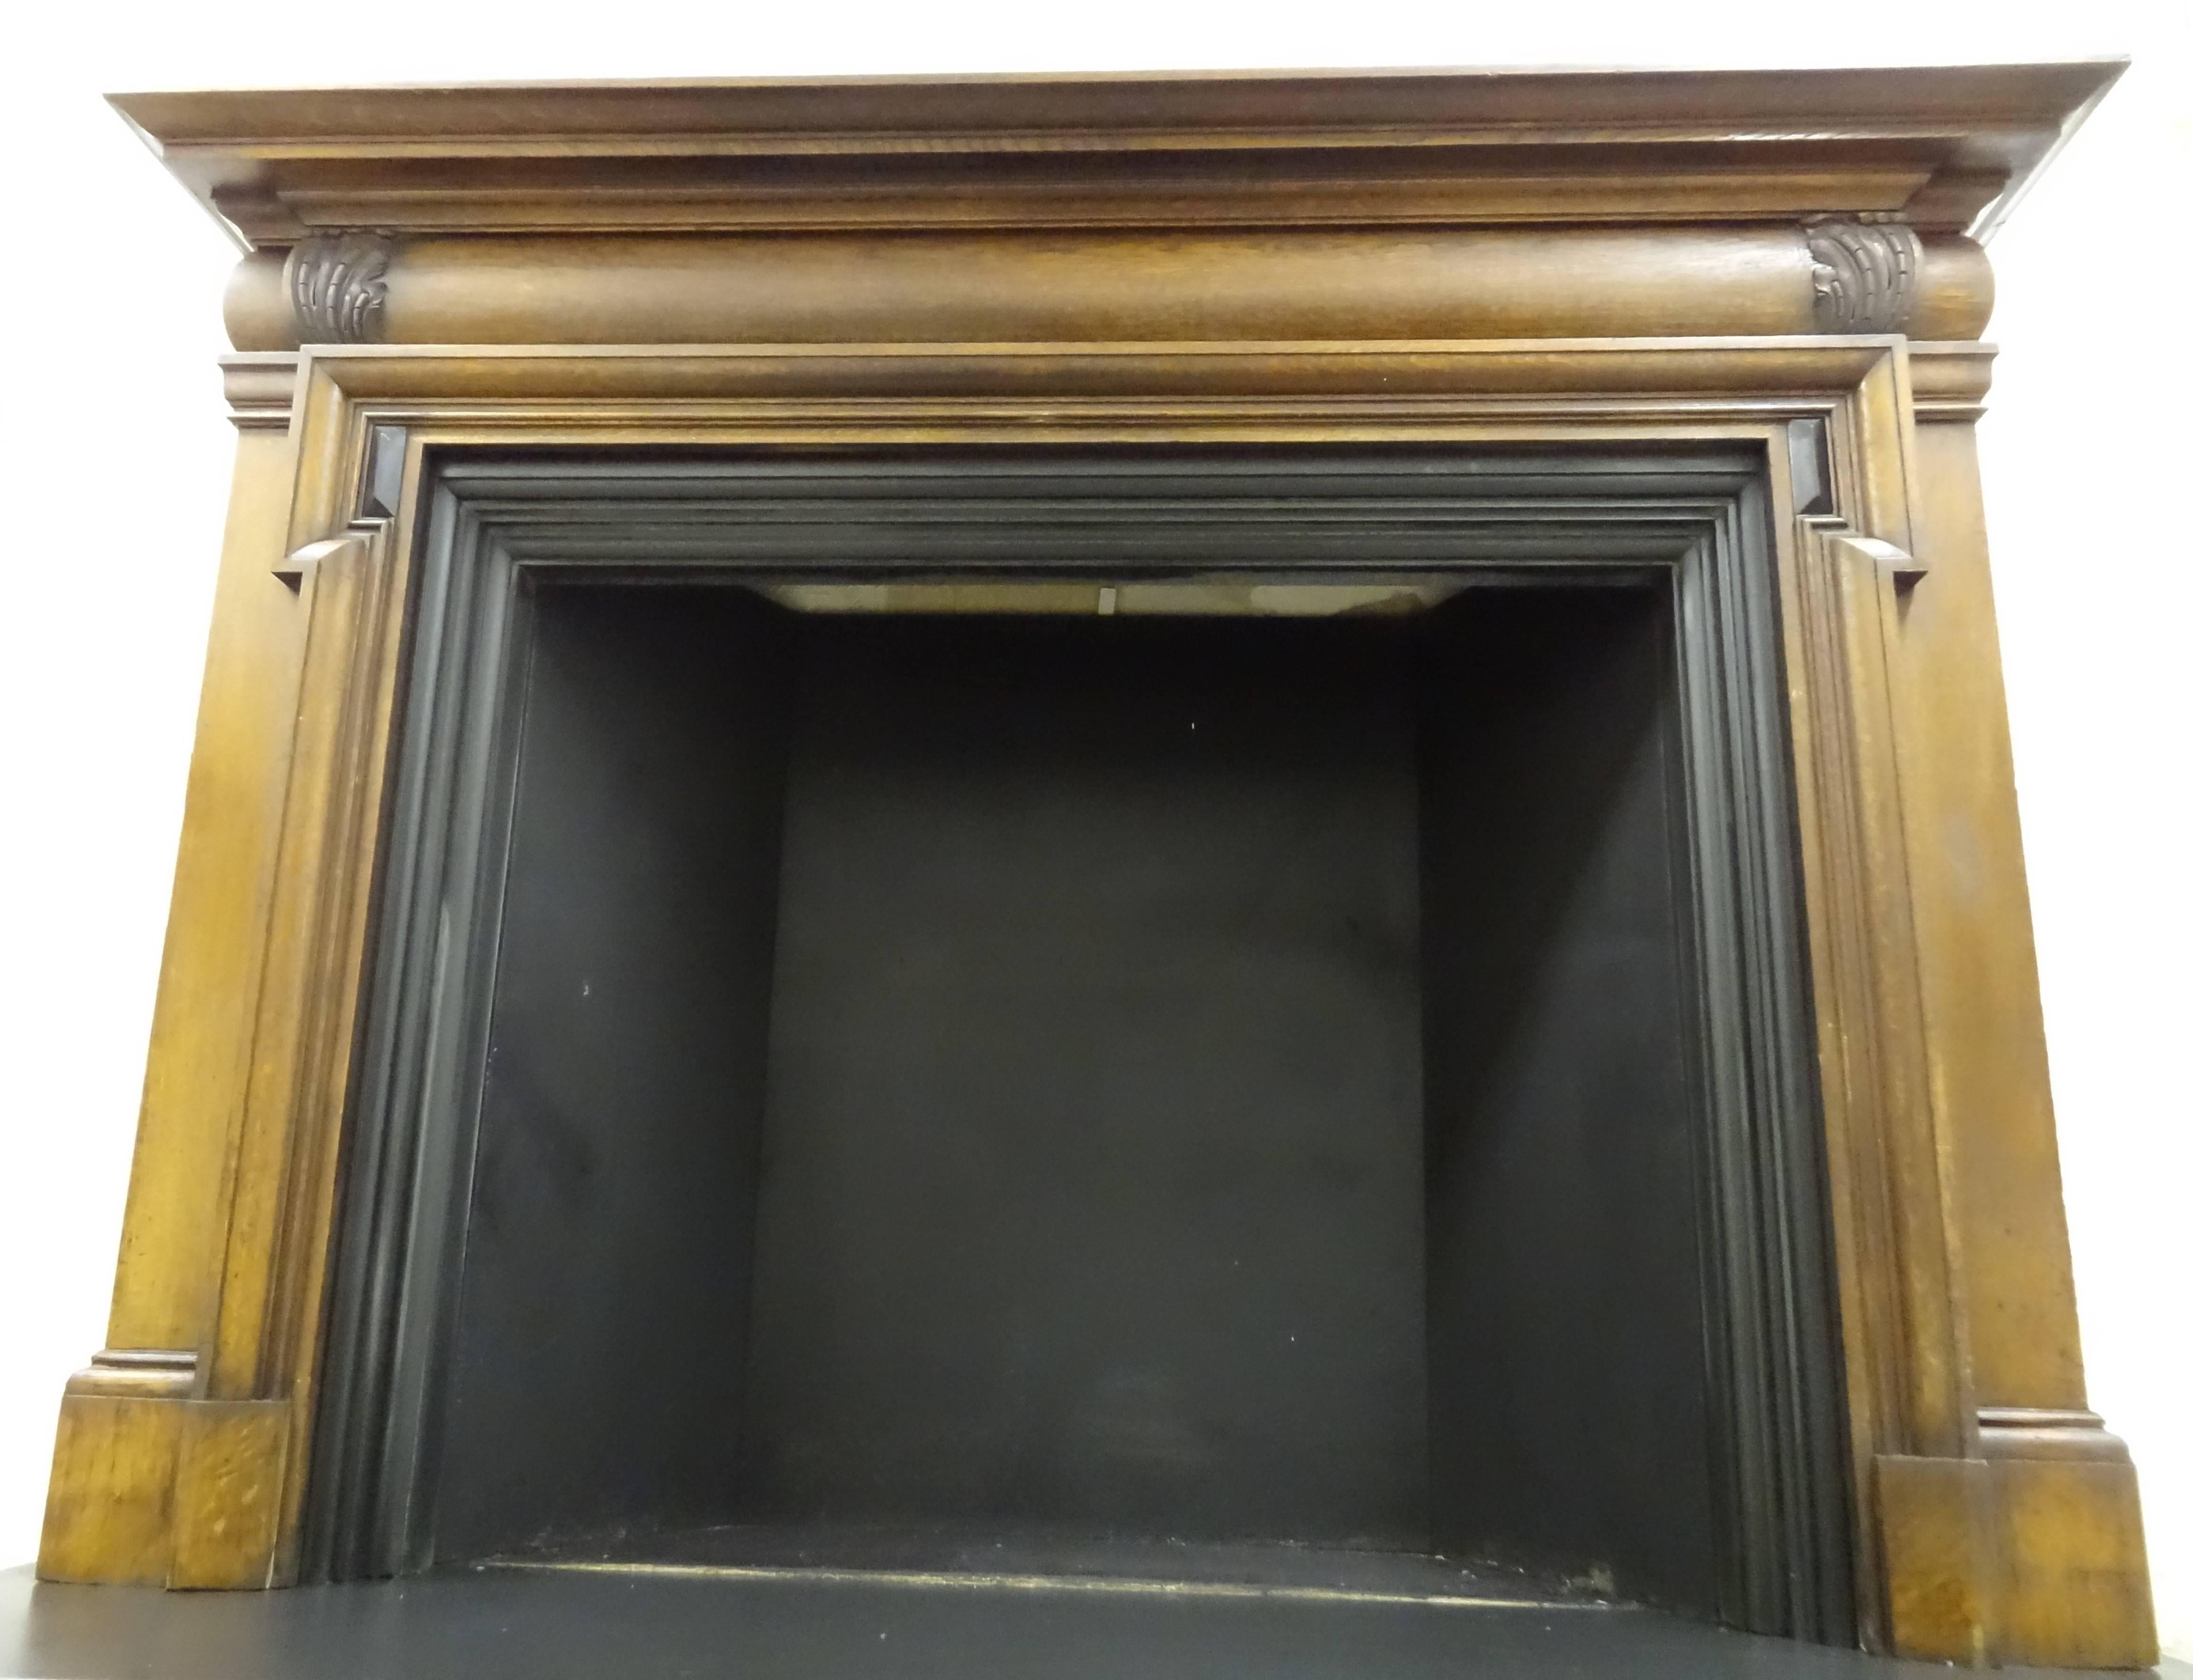 Reclaimed antique Victorian carved oak bolection fire surround with contrasting dark ebony feature. Brass plate with switch fitted to right hand gable and brass fitting for electric wiring fitted to top of mantel. Slate hearth and trim priced